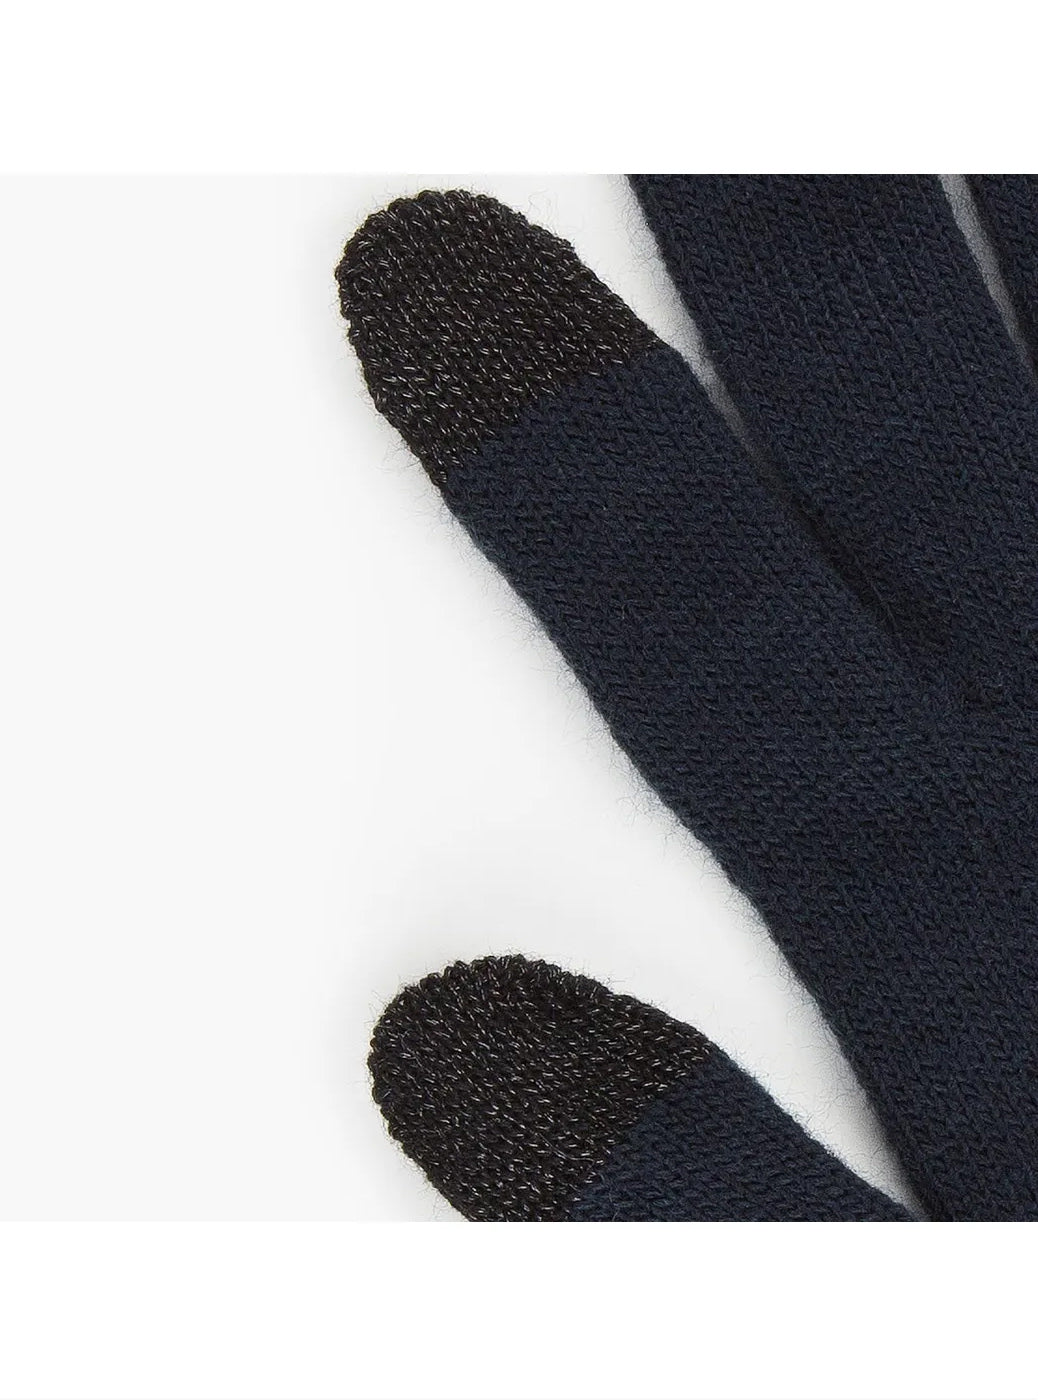 Levi's Touch-screen Gloves - Navy